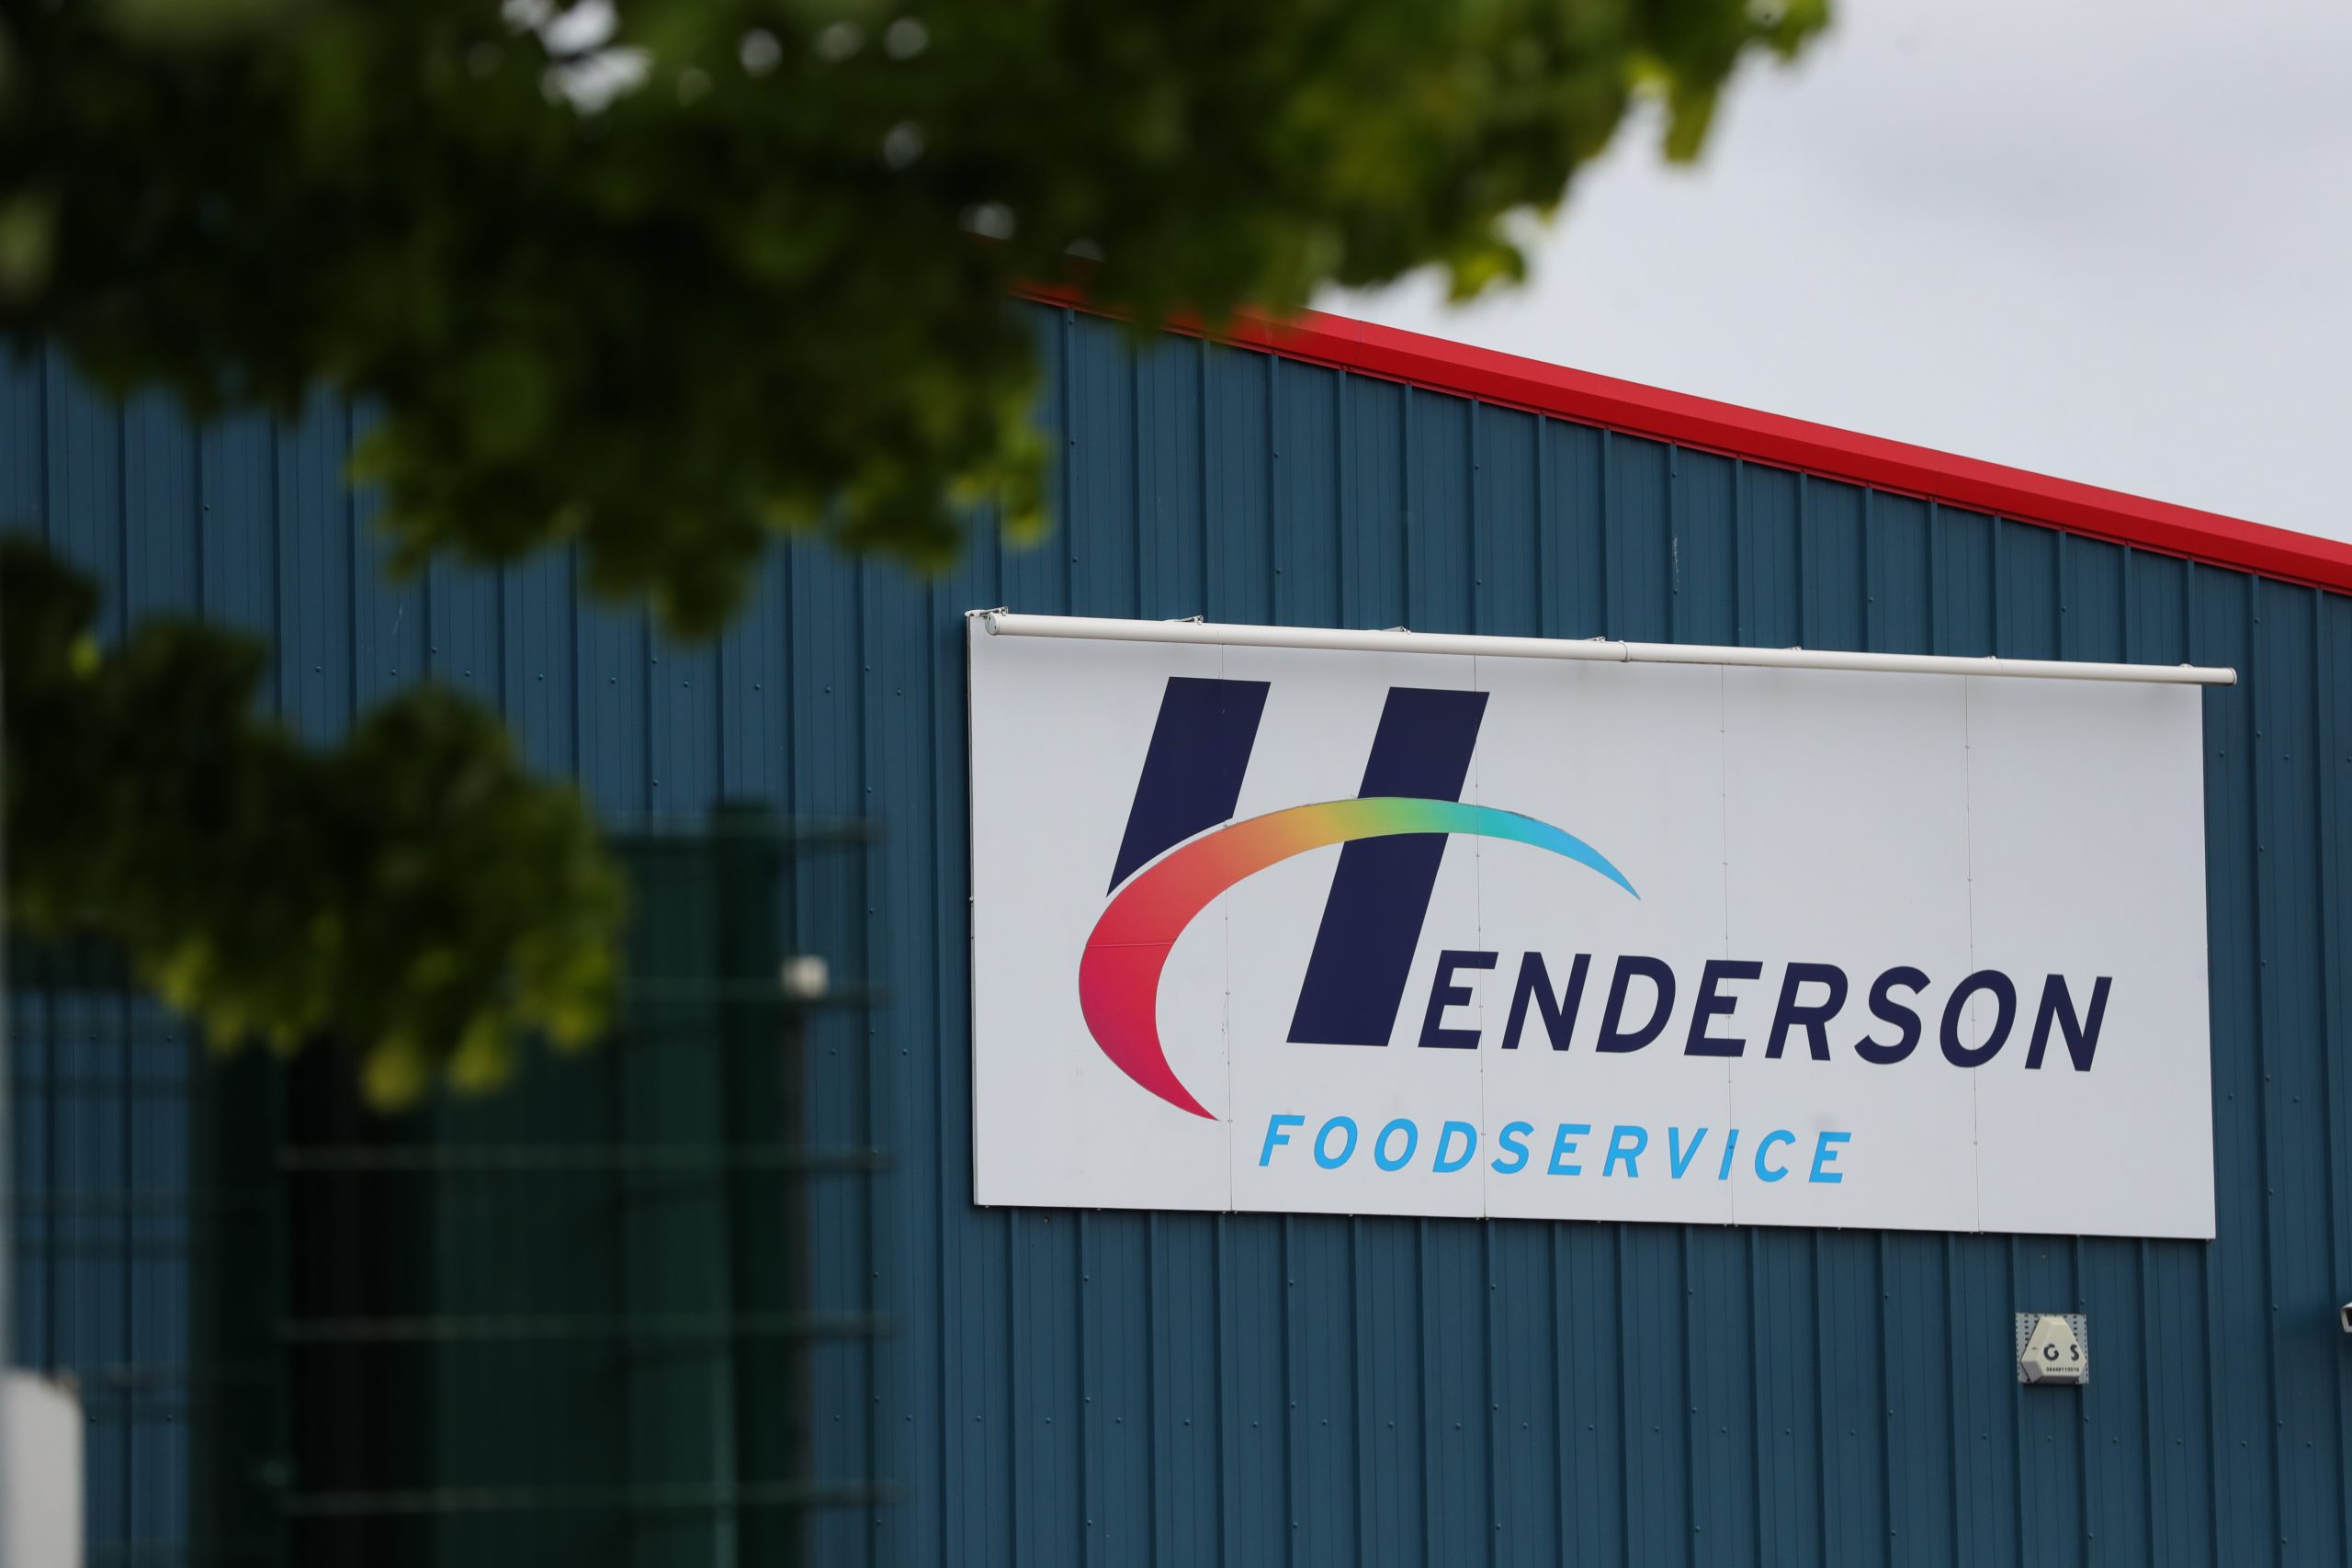 Henderson Foodservice propose to Integrate BD Foods and Foodco